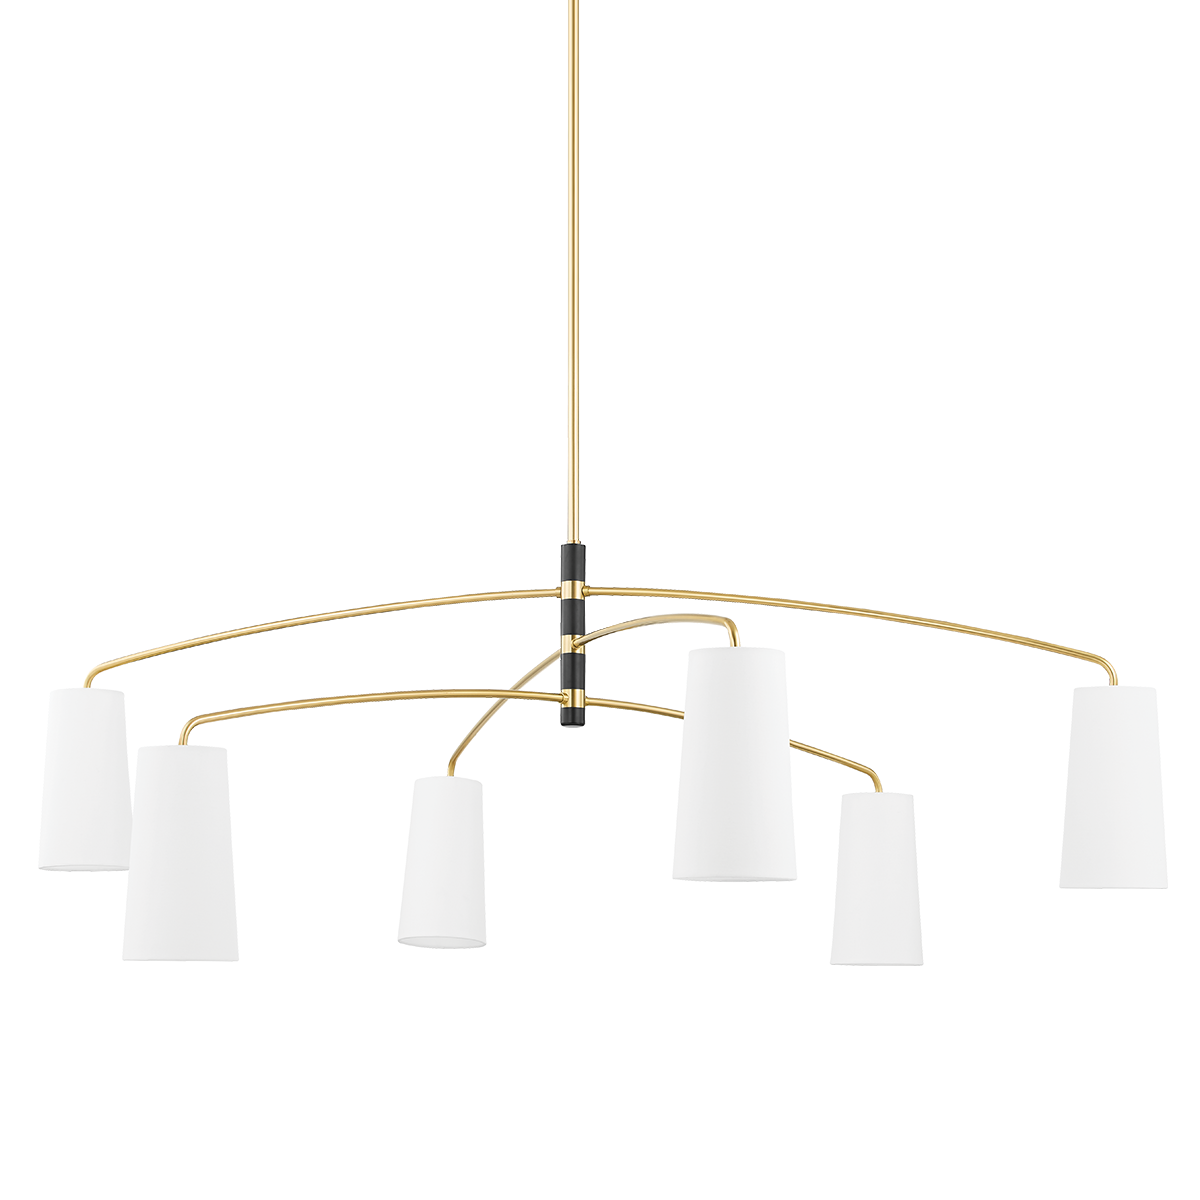 Aged Brass and Soft Black Arm and Frame with White Linen Shade Chandelier